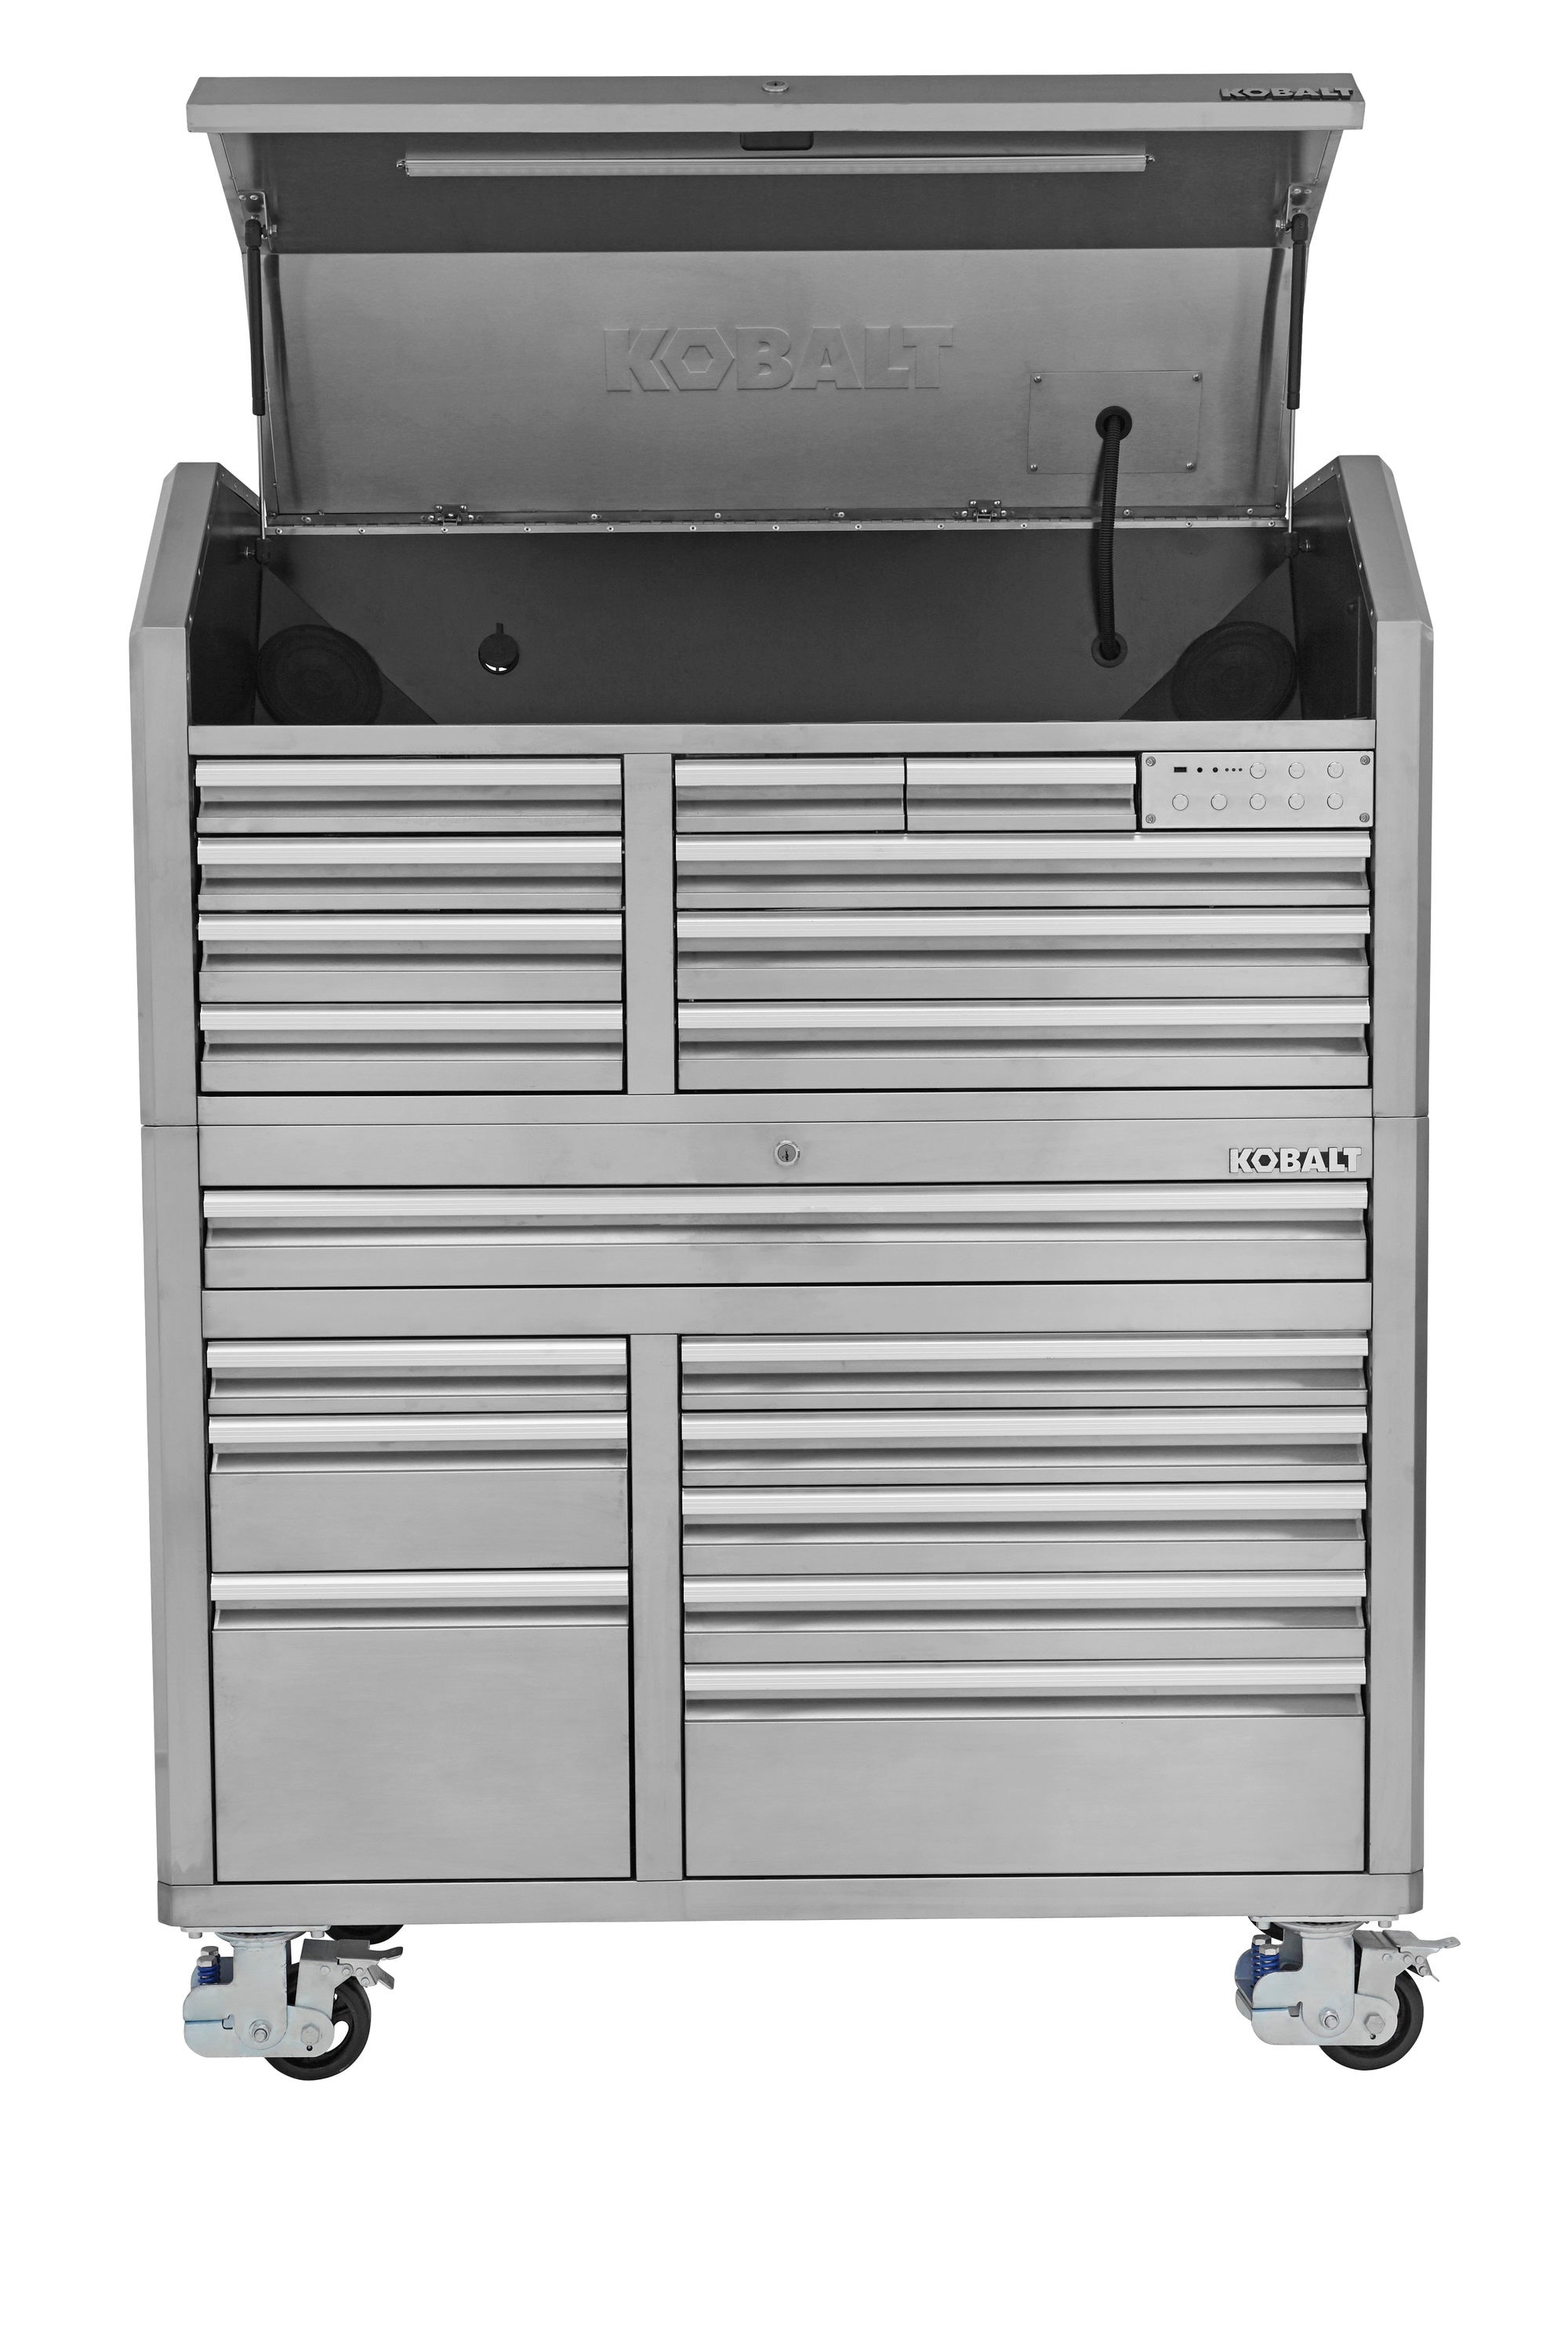 Kobalt 3000 Series 53 In W X 68 7 In H 18 Drawer Stainless Steel Rolling Tool Cabinet Stainless Steel In The Bottom Tool Cabinets Department At Lowes Com